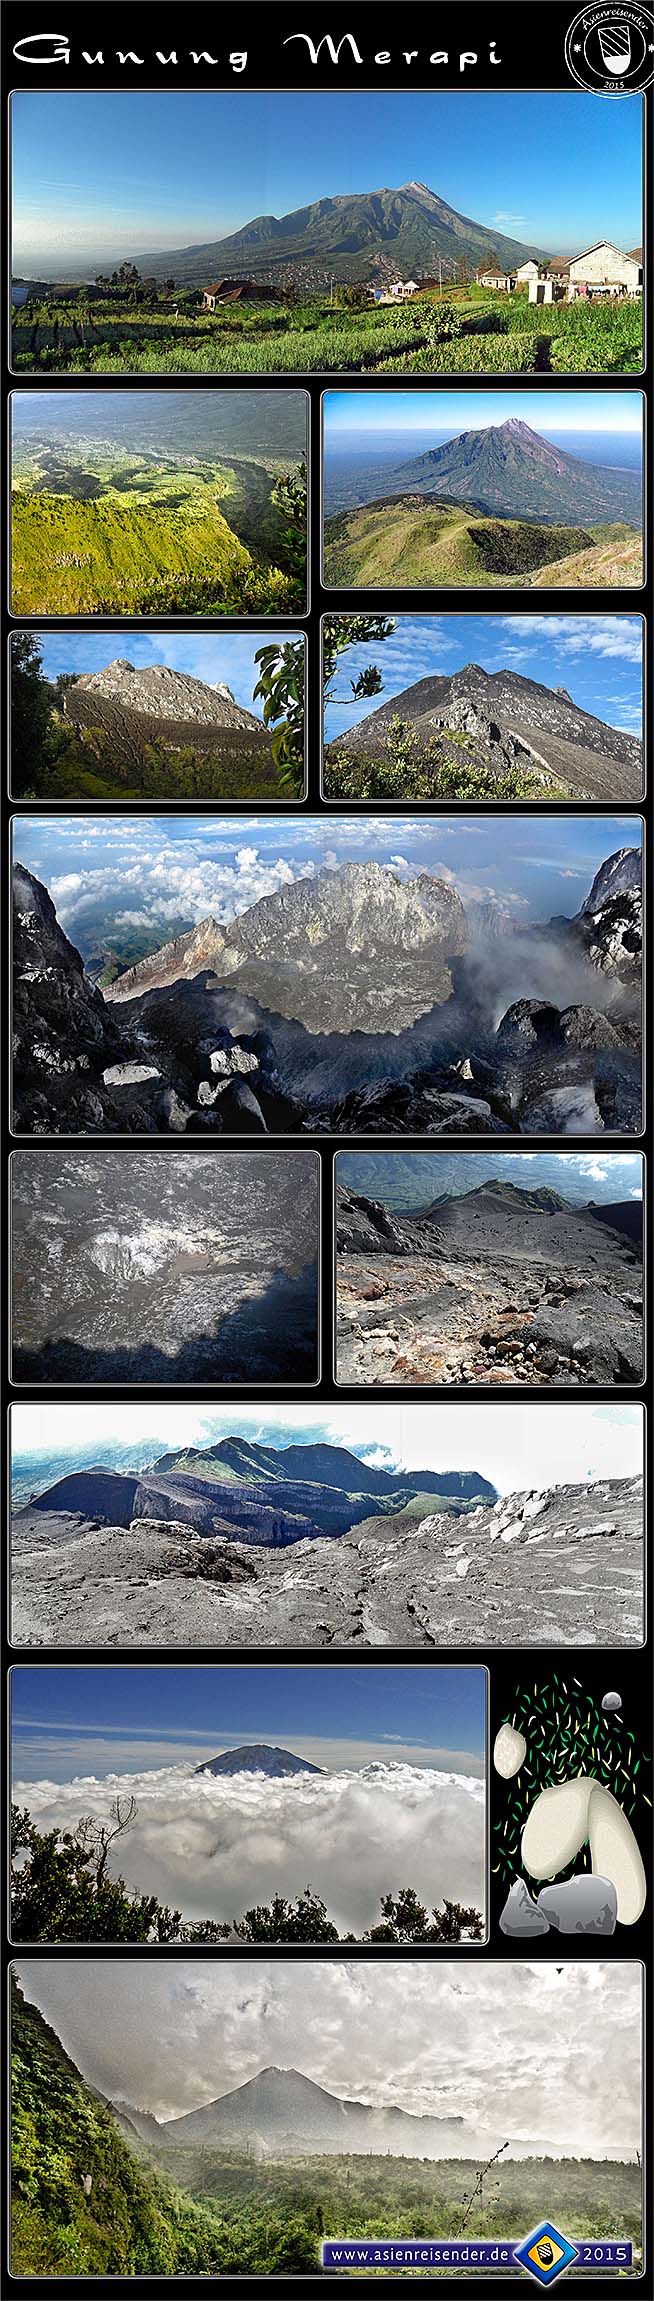 'Impressions from Gunung / Mount Merapi in a Photocomposition' by Asienreisender